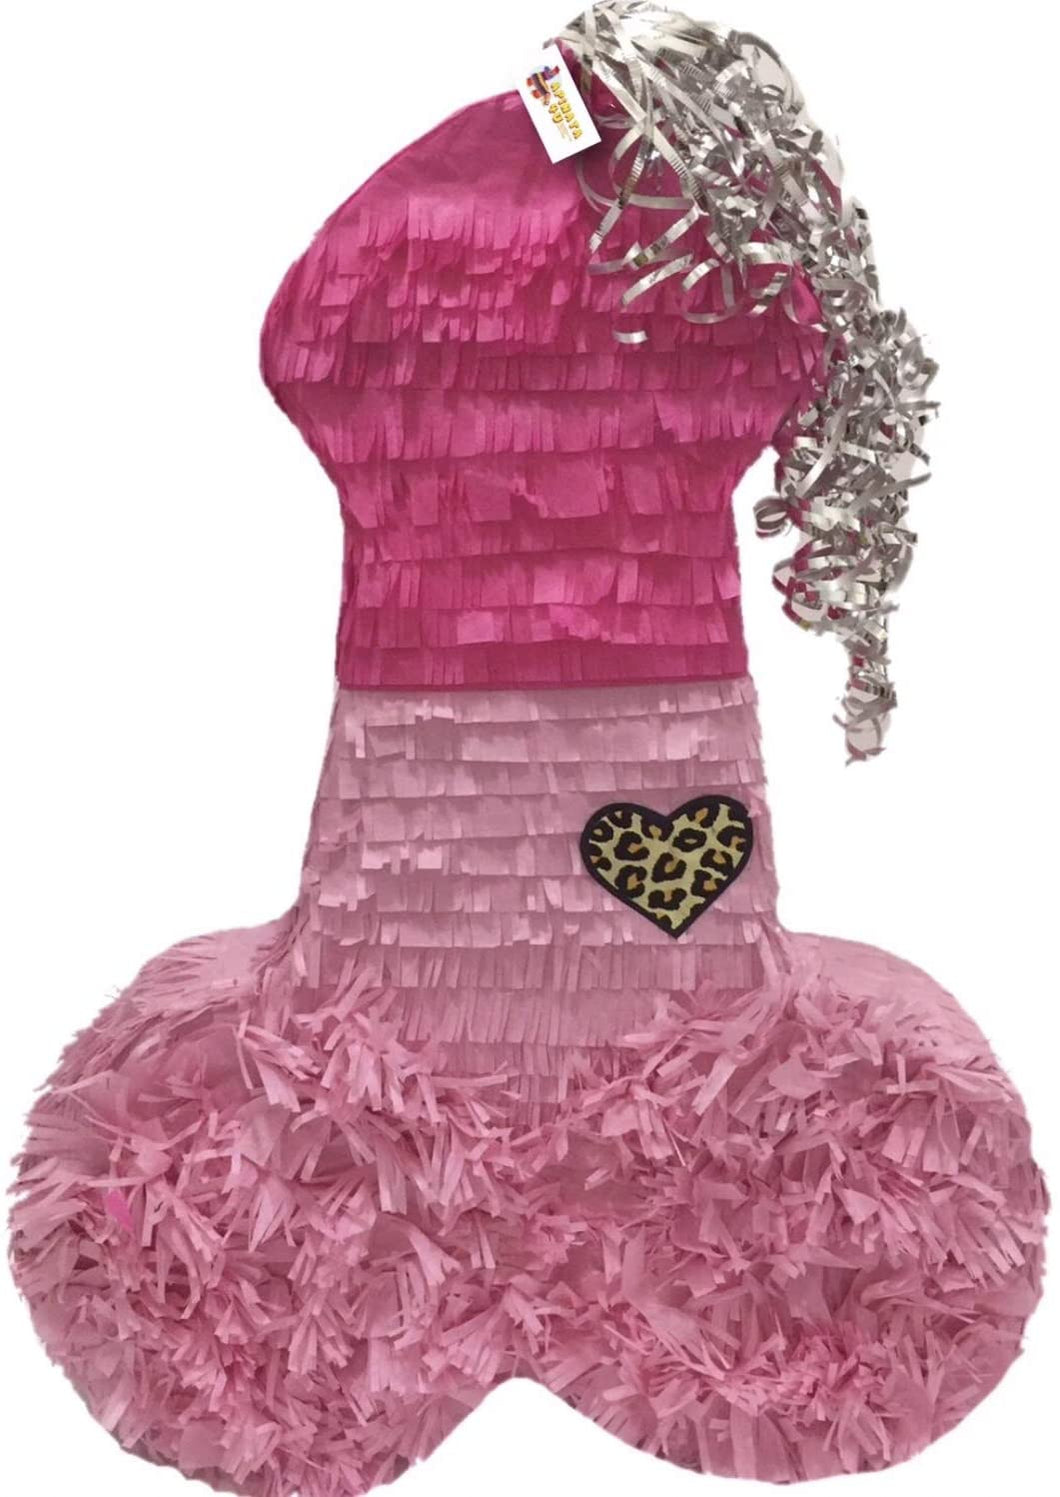 20” Tall Pink Penis Pinata Diva Themed Bachelorette Adult Party Over The Hill Gag Gift